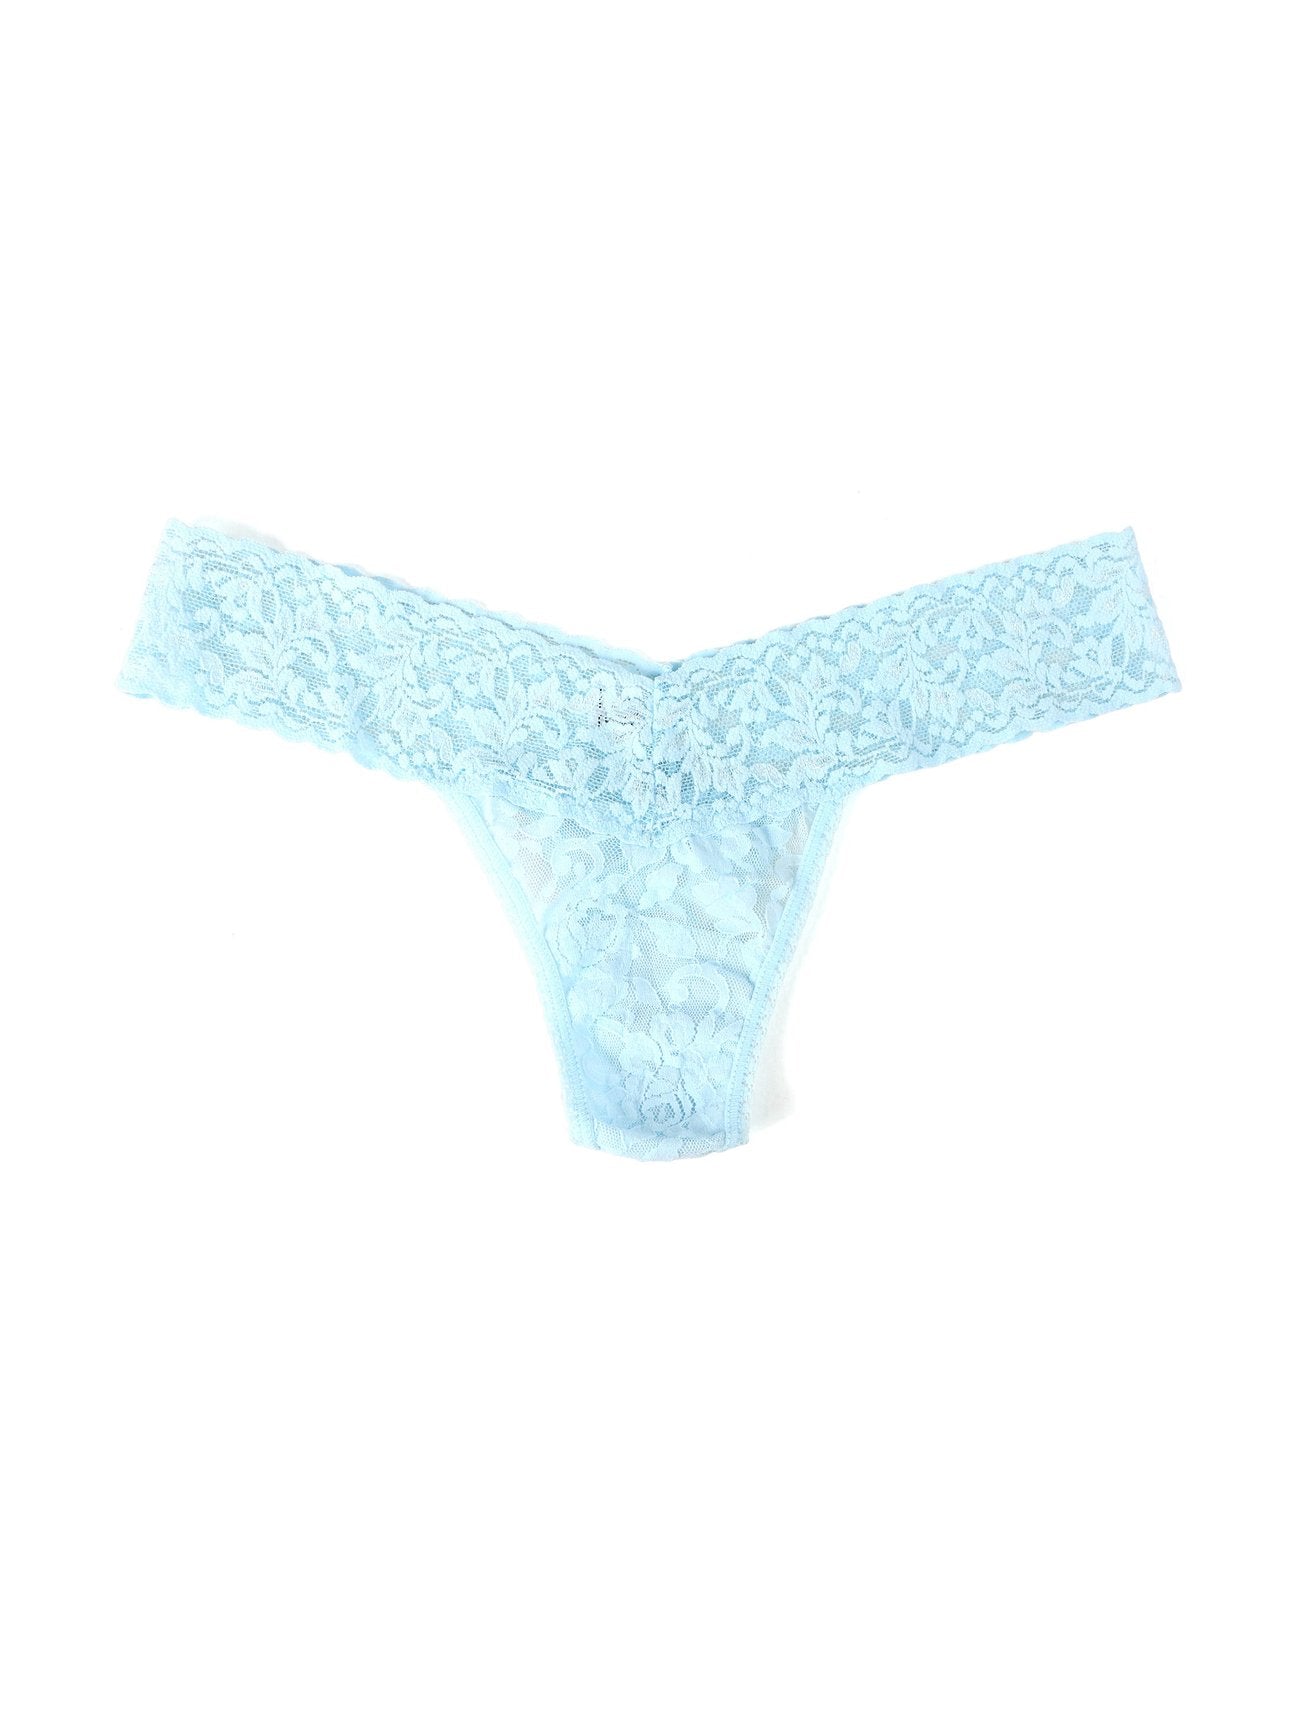 Buy celeste-blue Hanky Panky Signature Lace Low Rise Thong - Packaged 4911p